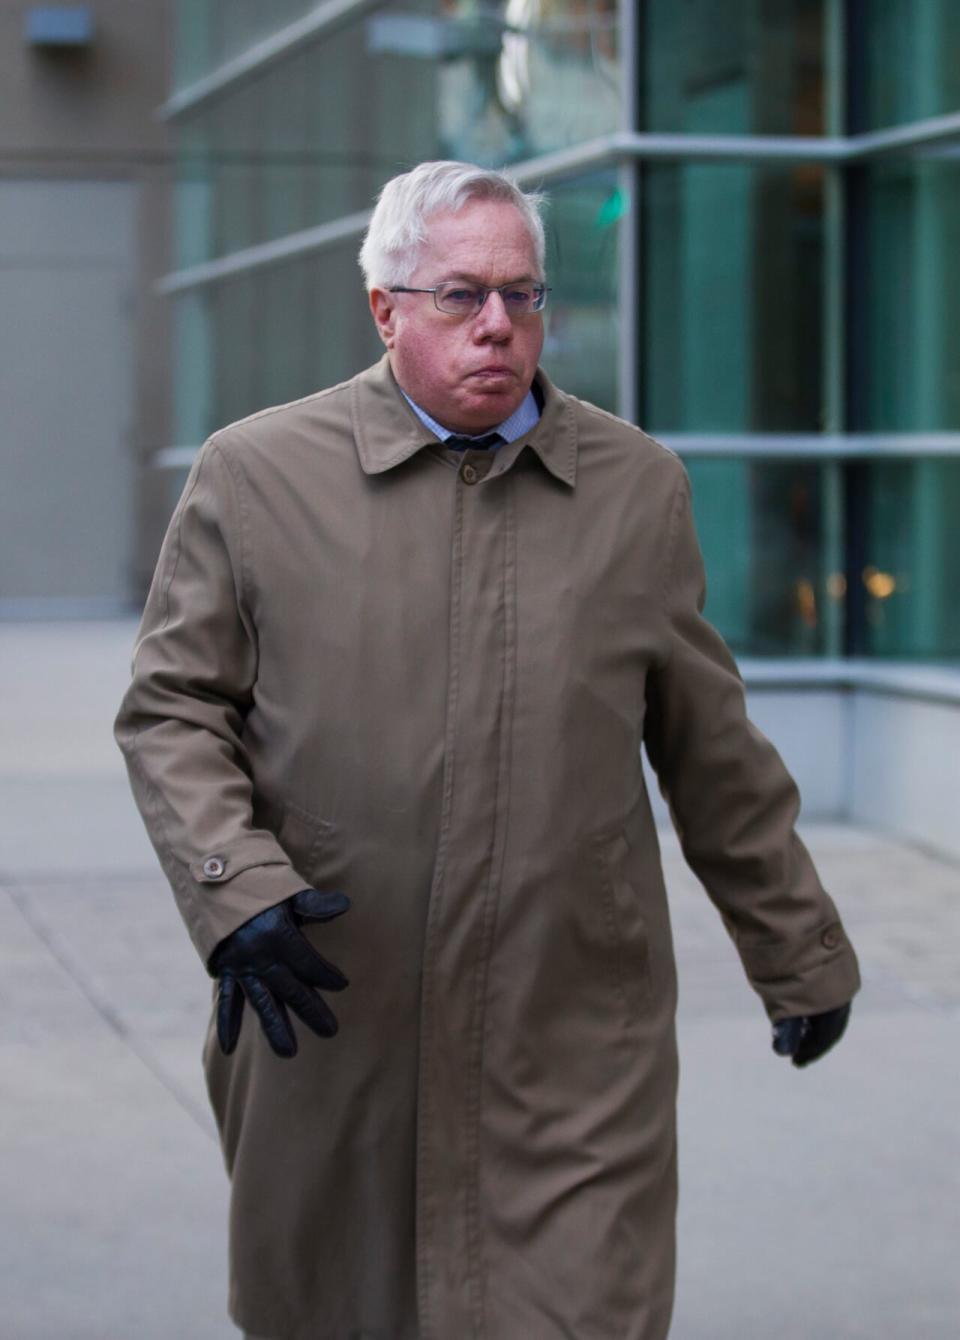 Retired neurologist Keith Hoyte leaves the Calgary courthouse on Jan. 6, 2020. Hoyte admitted in court to sexually assaulting 55 female patients over three decades. (Todd Korol/The Canadian Press - image credit)